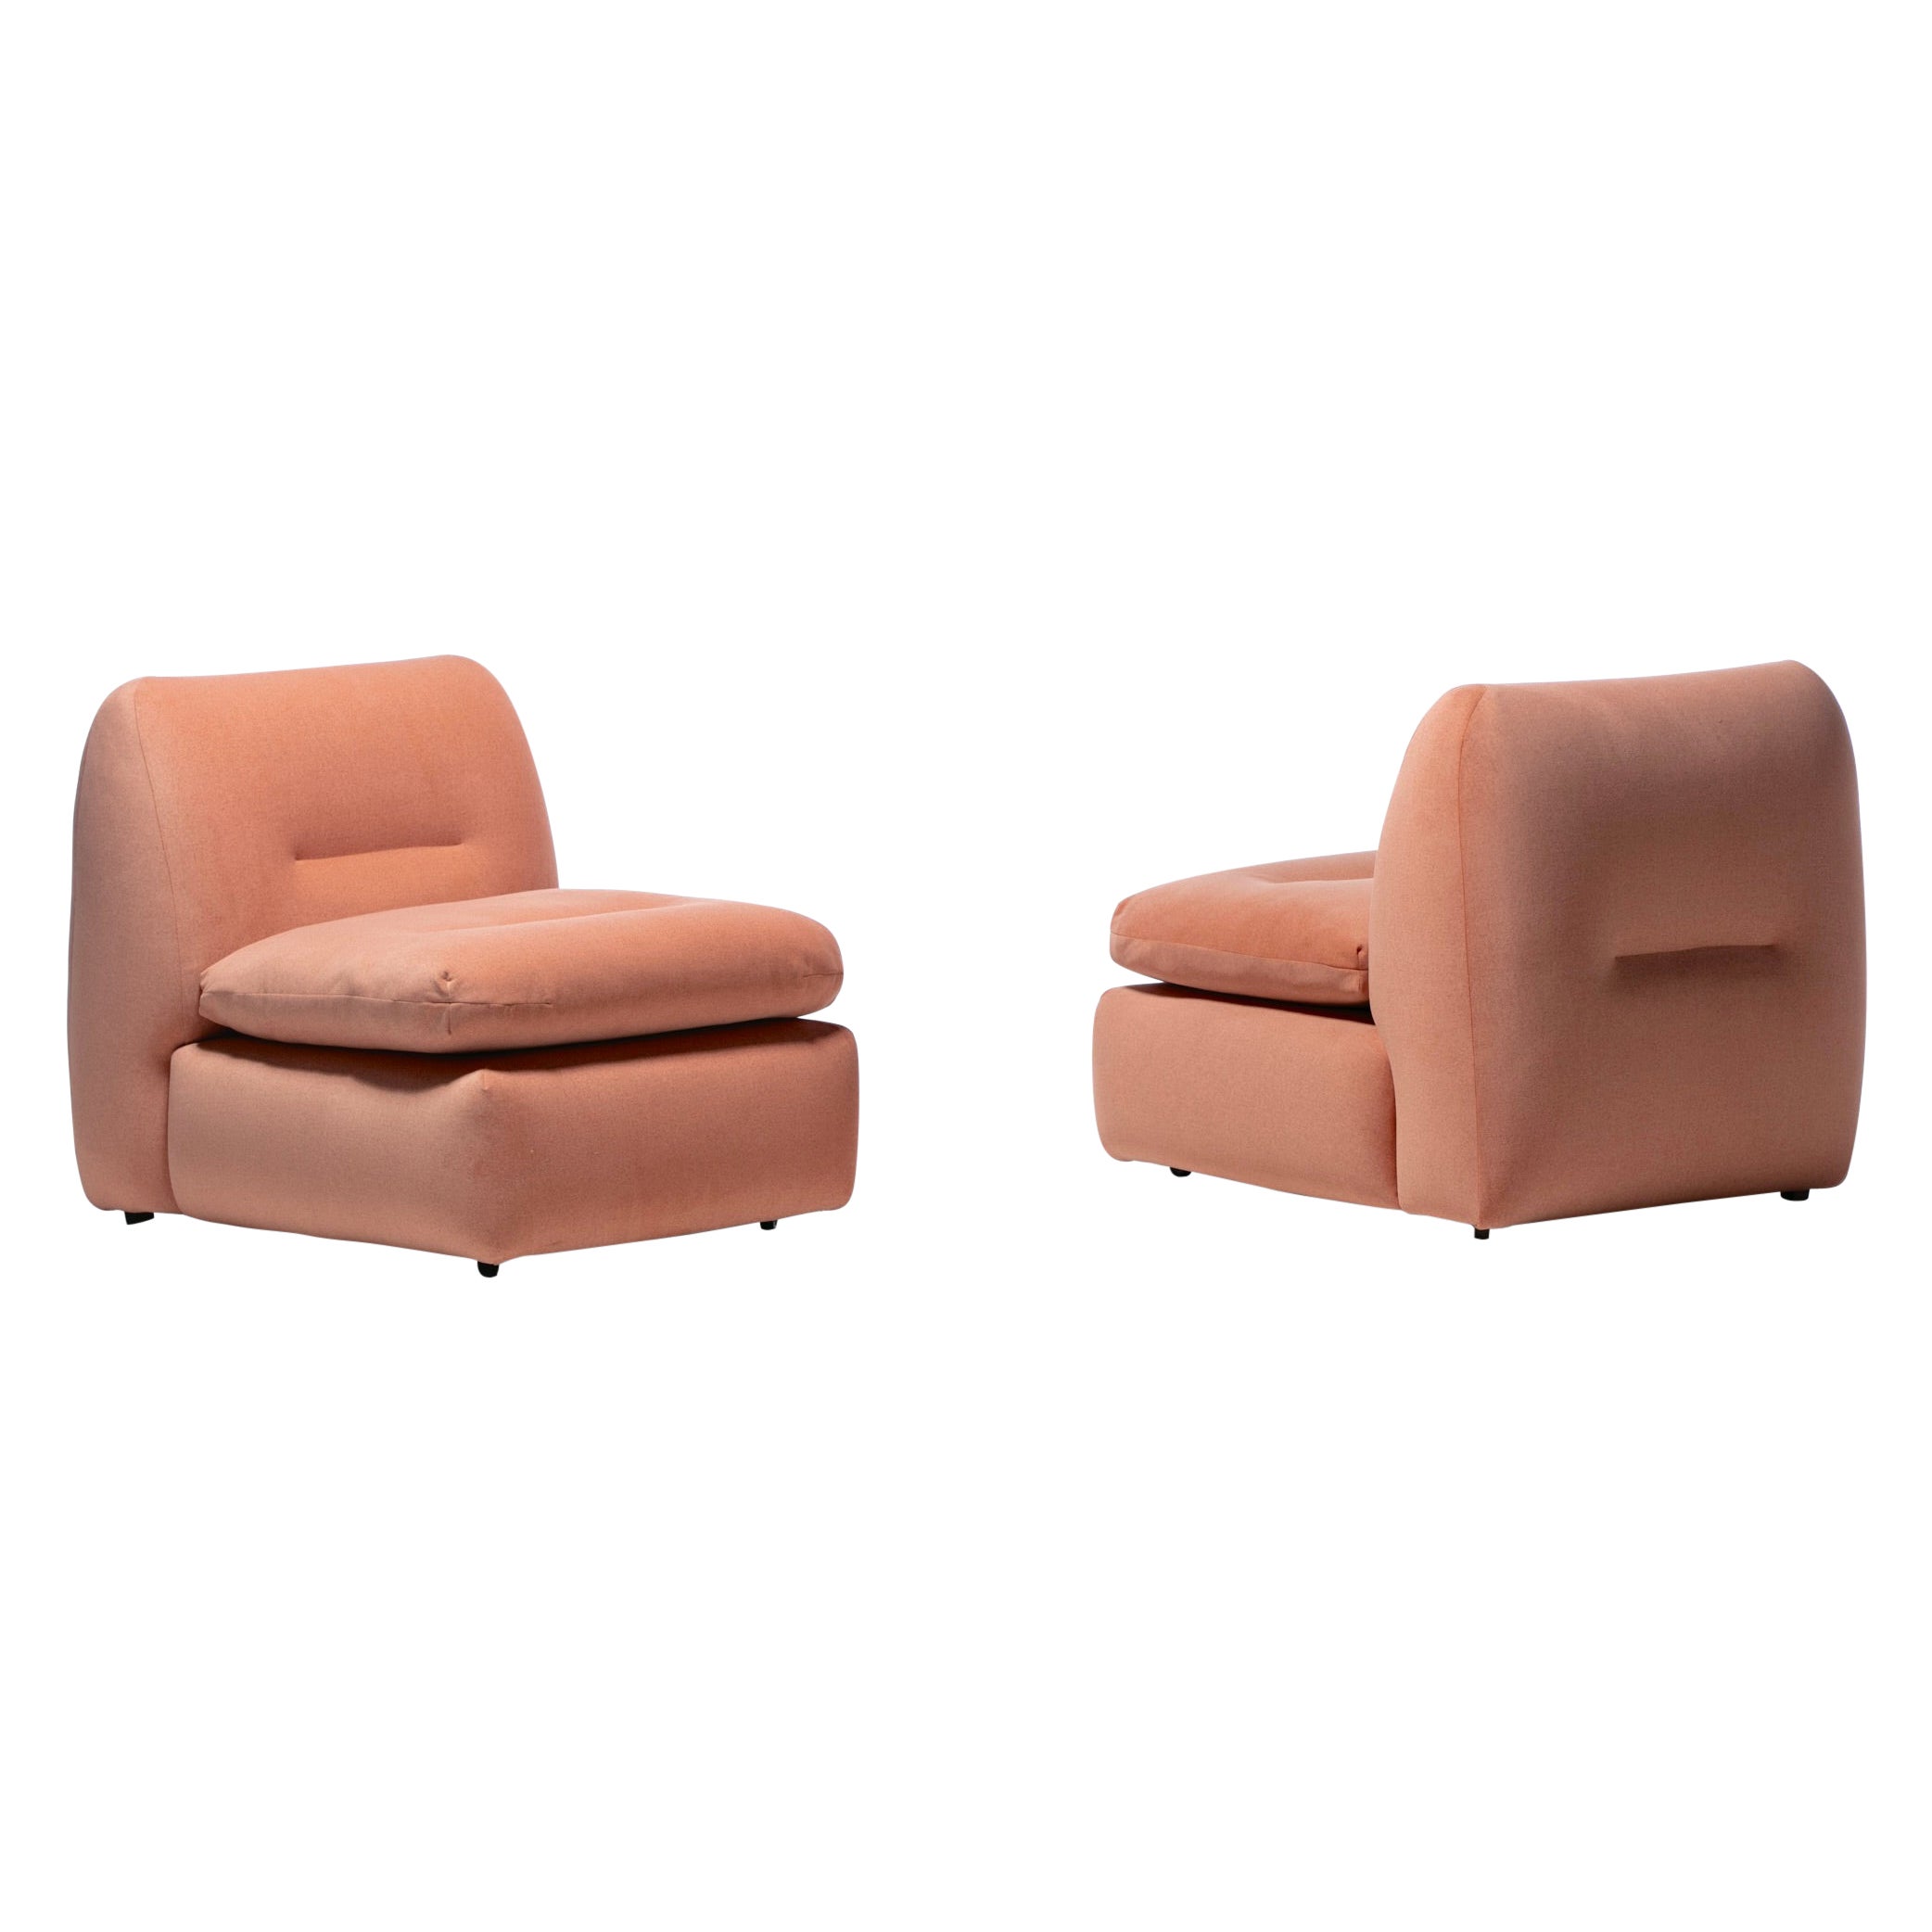 Pair of 1970s Italian Mario Bellini Style Slipper Chairs in Blush Pink Fabric For Sale